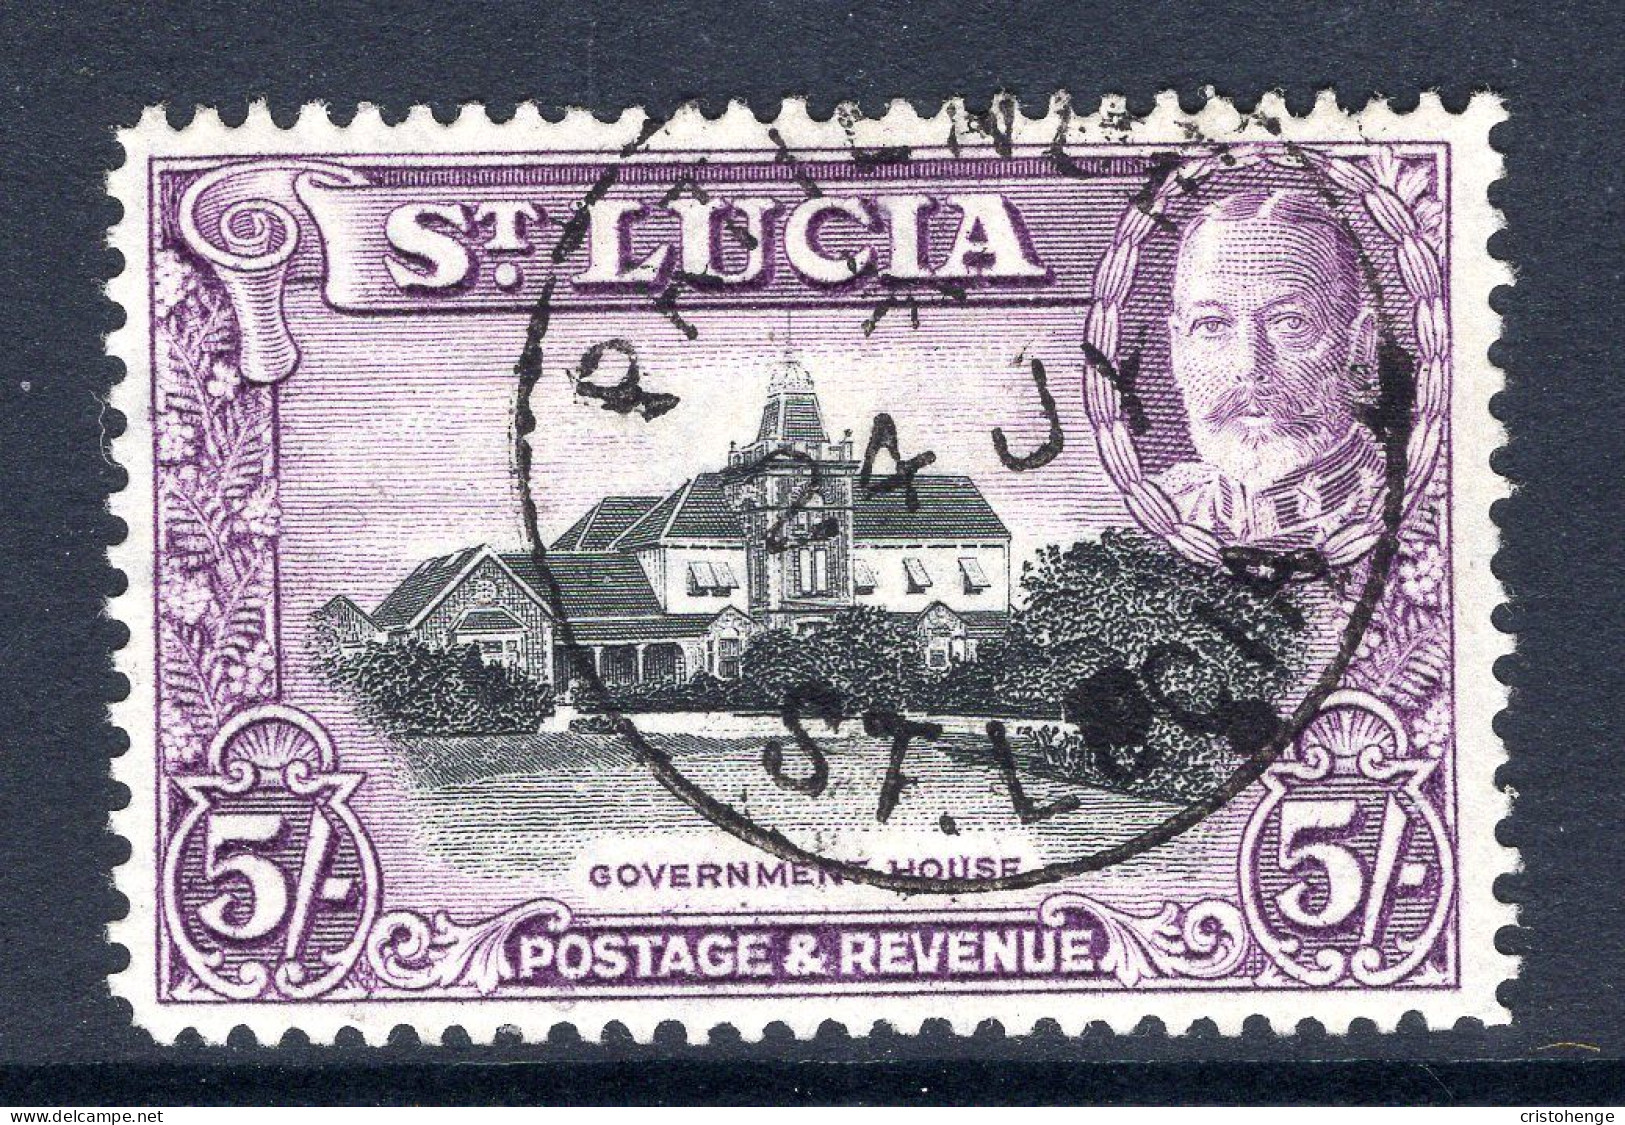 St Lucia 1936 KGV Pictorials - P.14 - 5/- Government House Used (SG 123) - Ste Lucie (...-1978)